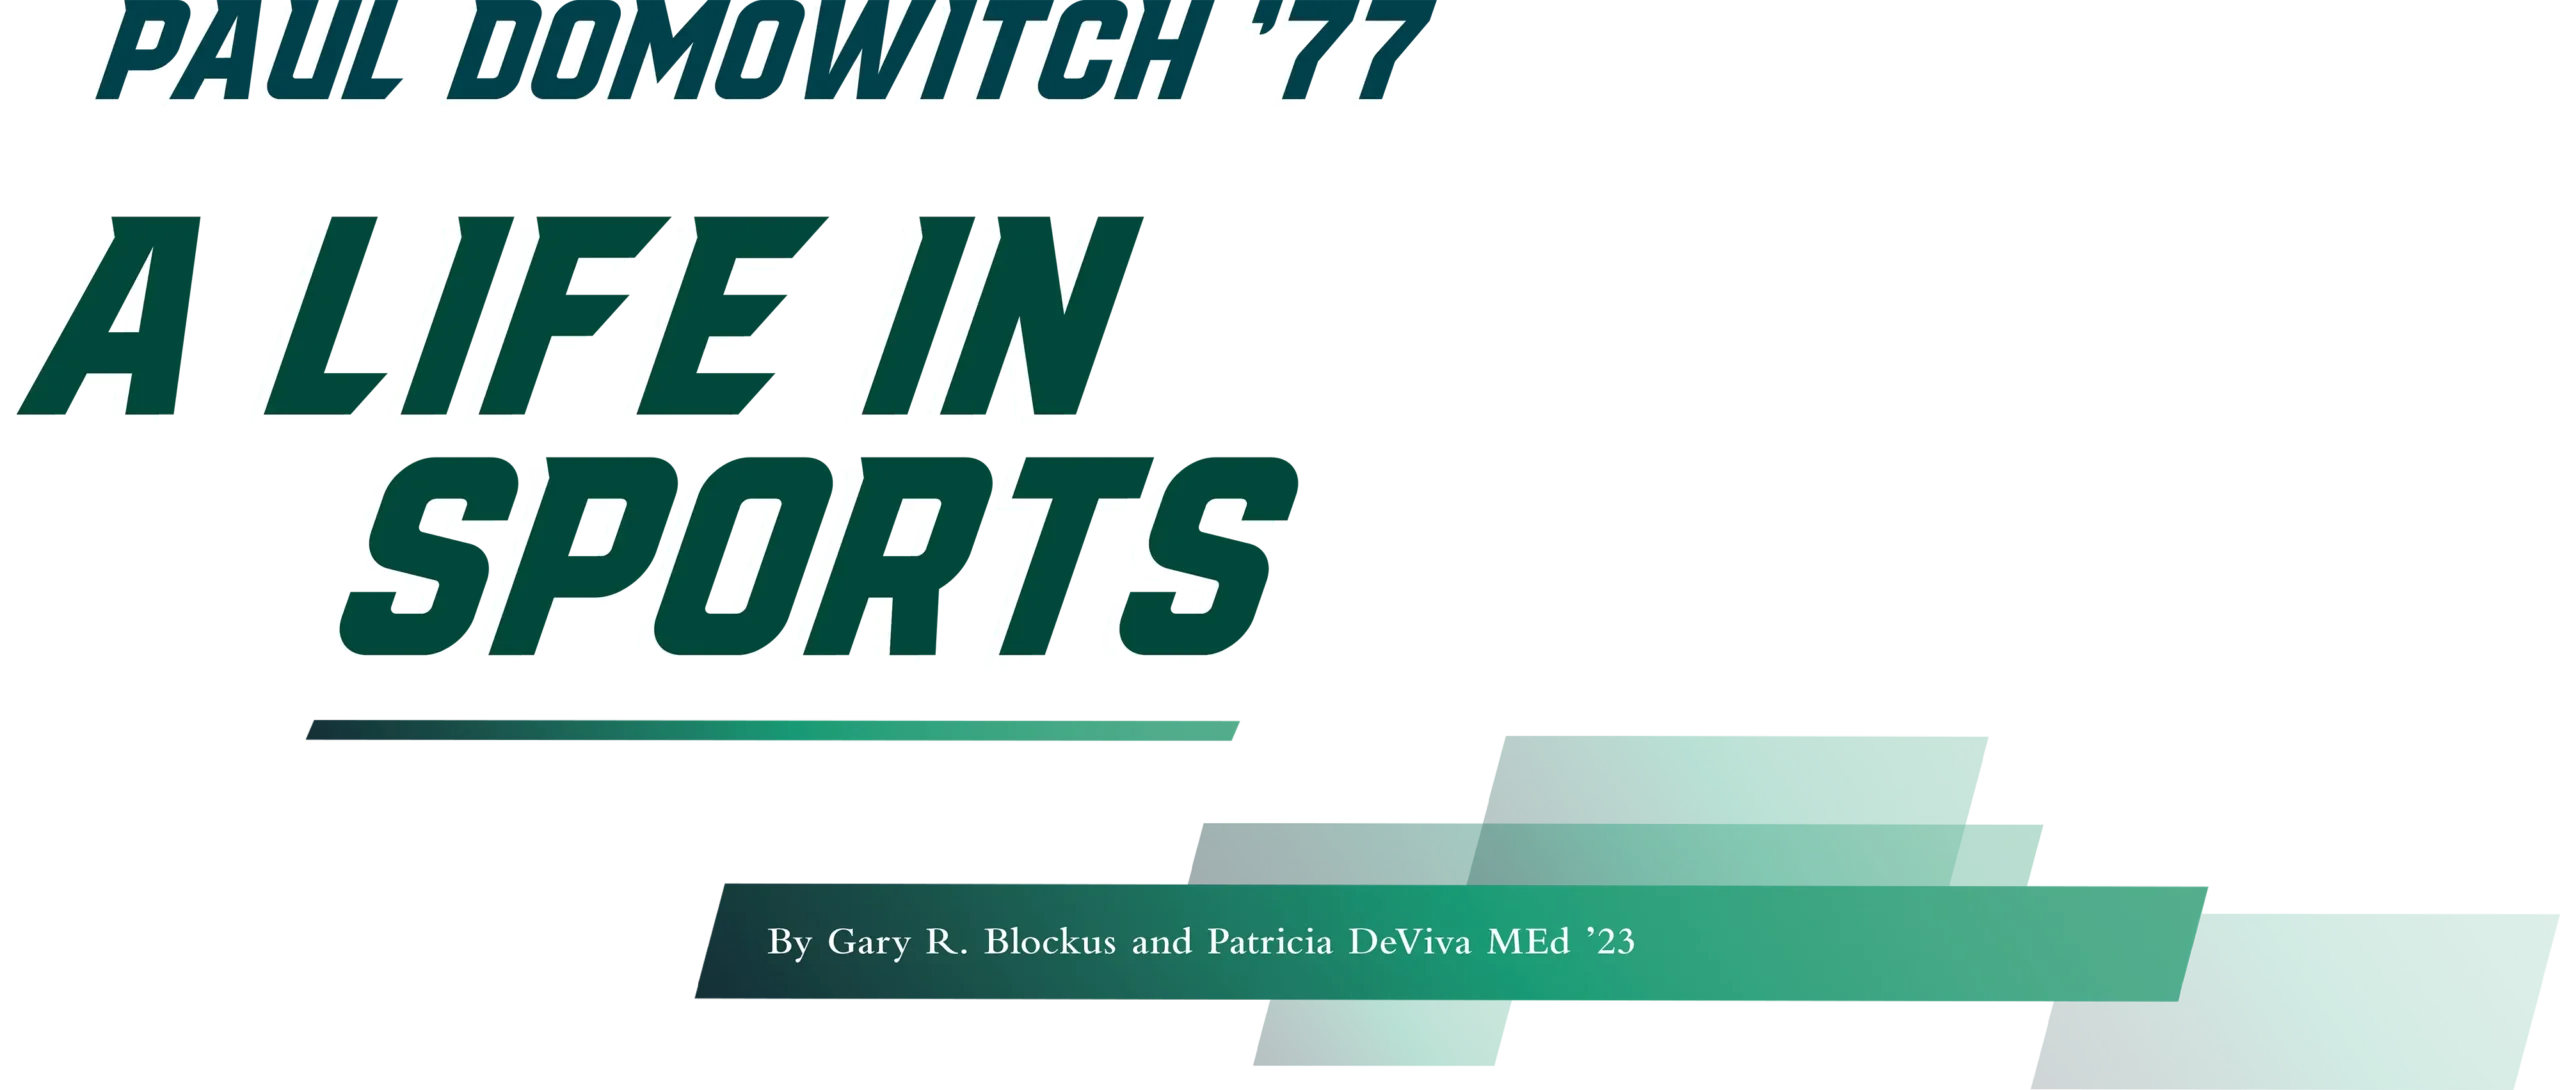 Paul Domowitch ’77: A Life in Sports. By Gary R. Blockus and Patricia DeViva MEd ’23